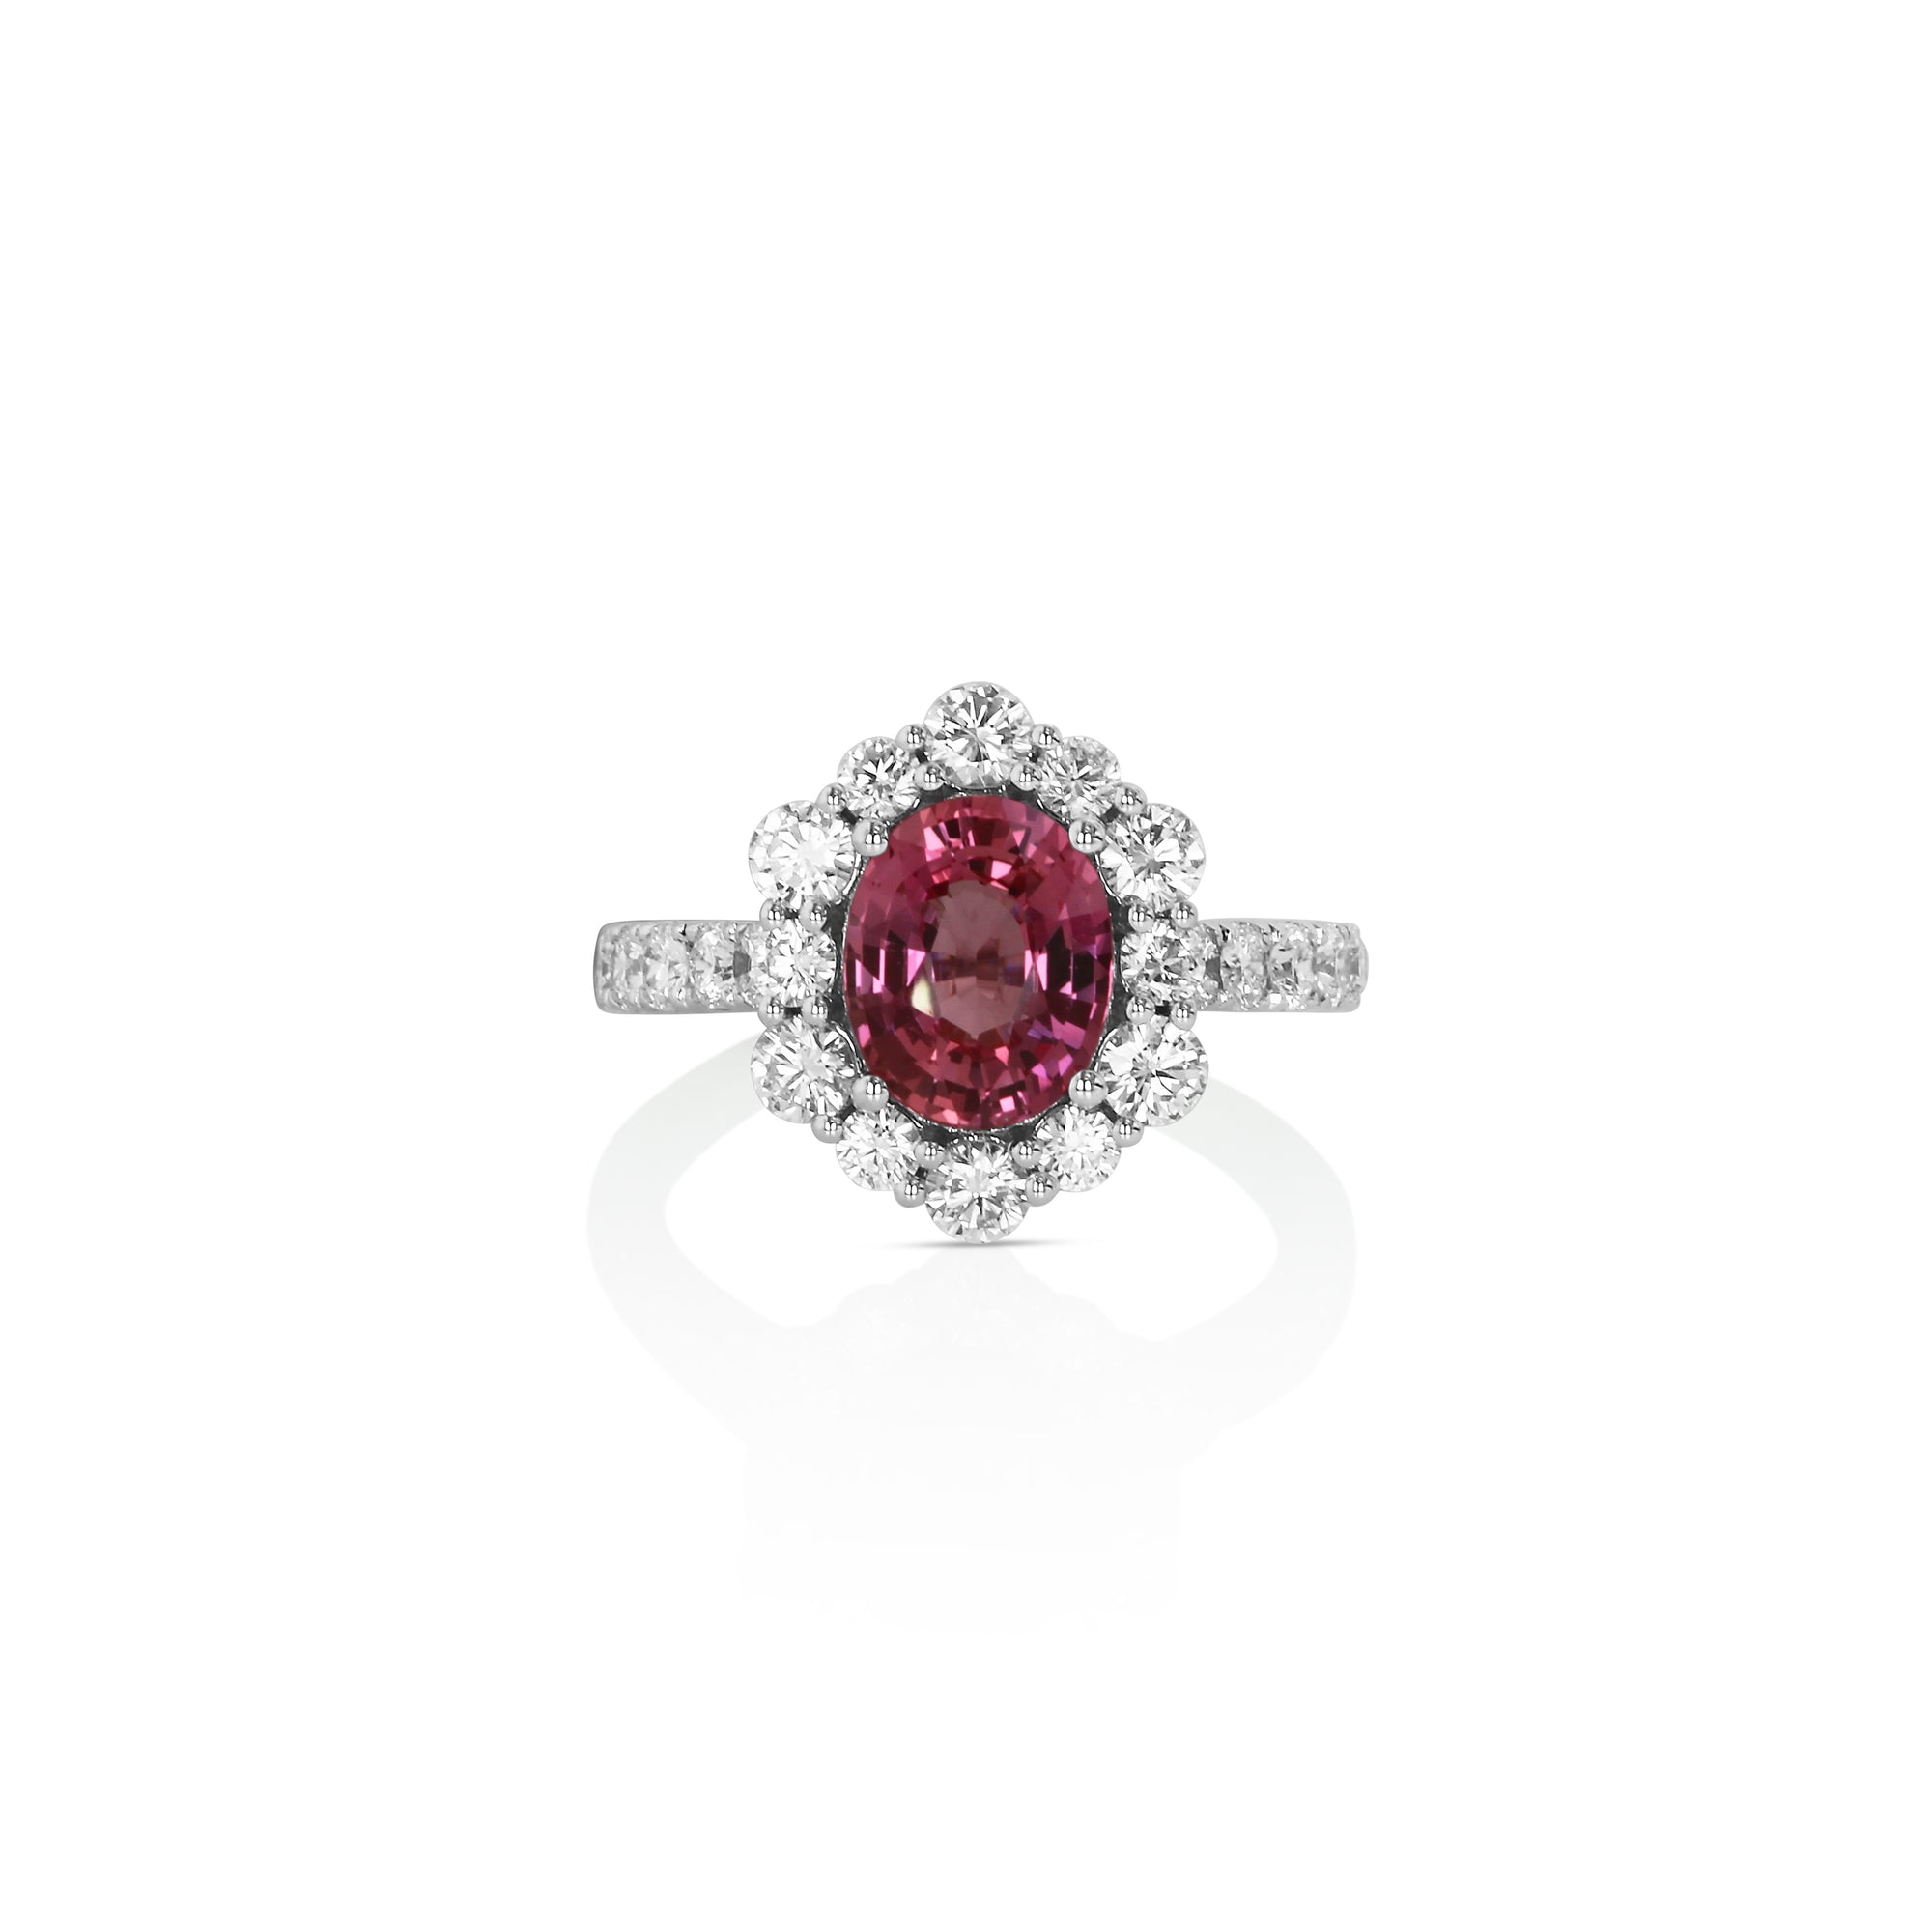 Pink Sapphire and Diamond Halo Ring by Yael